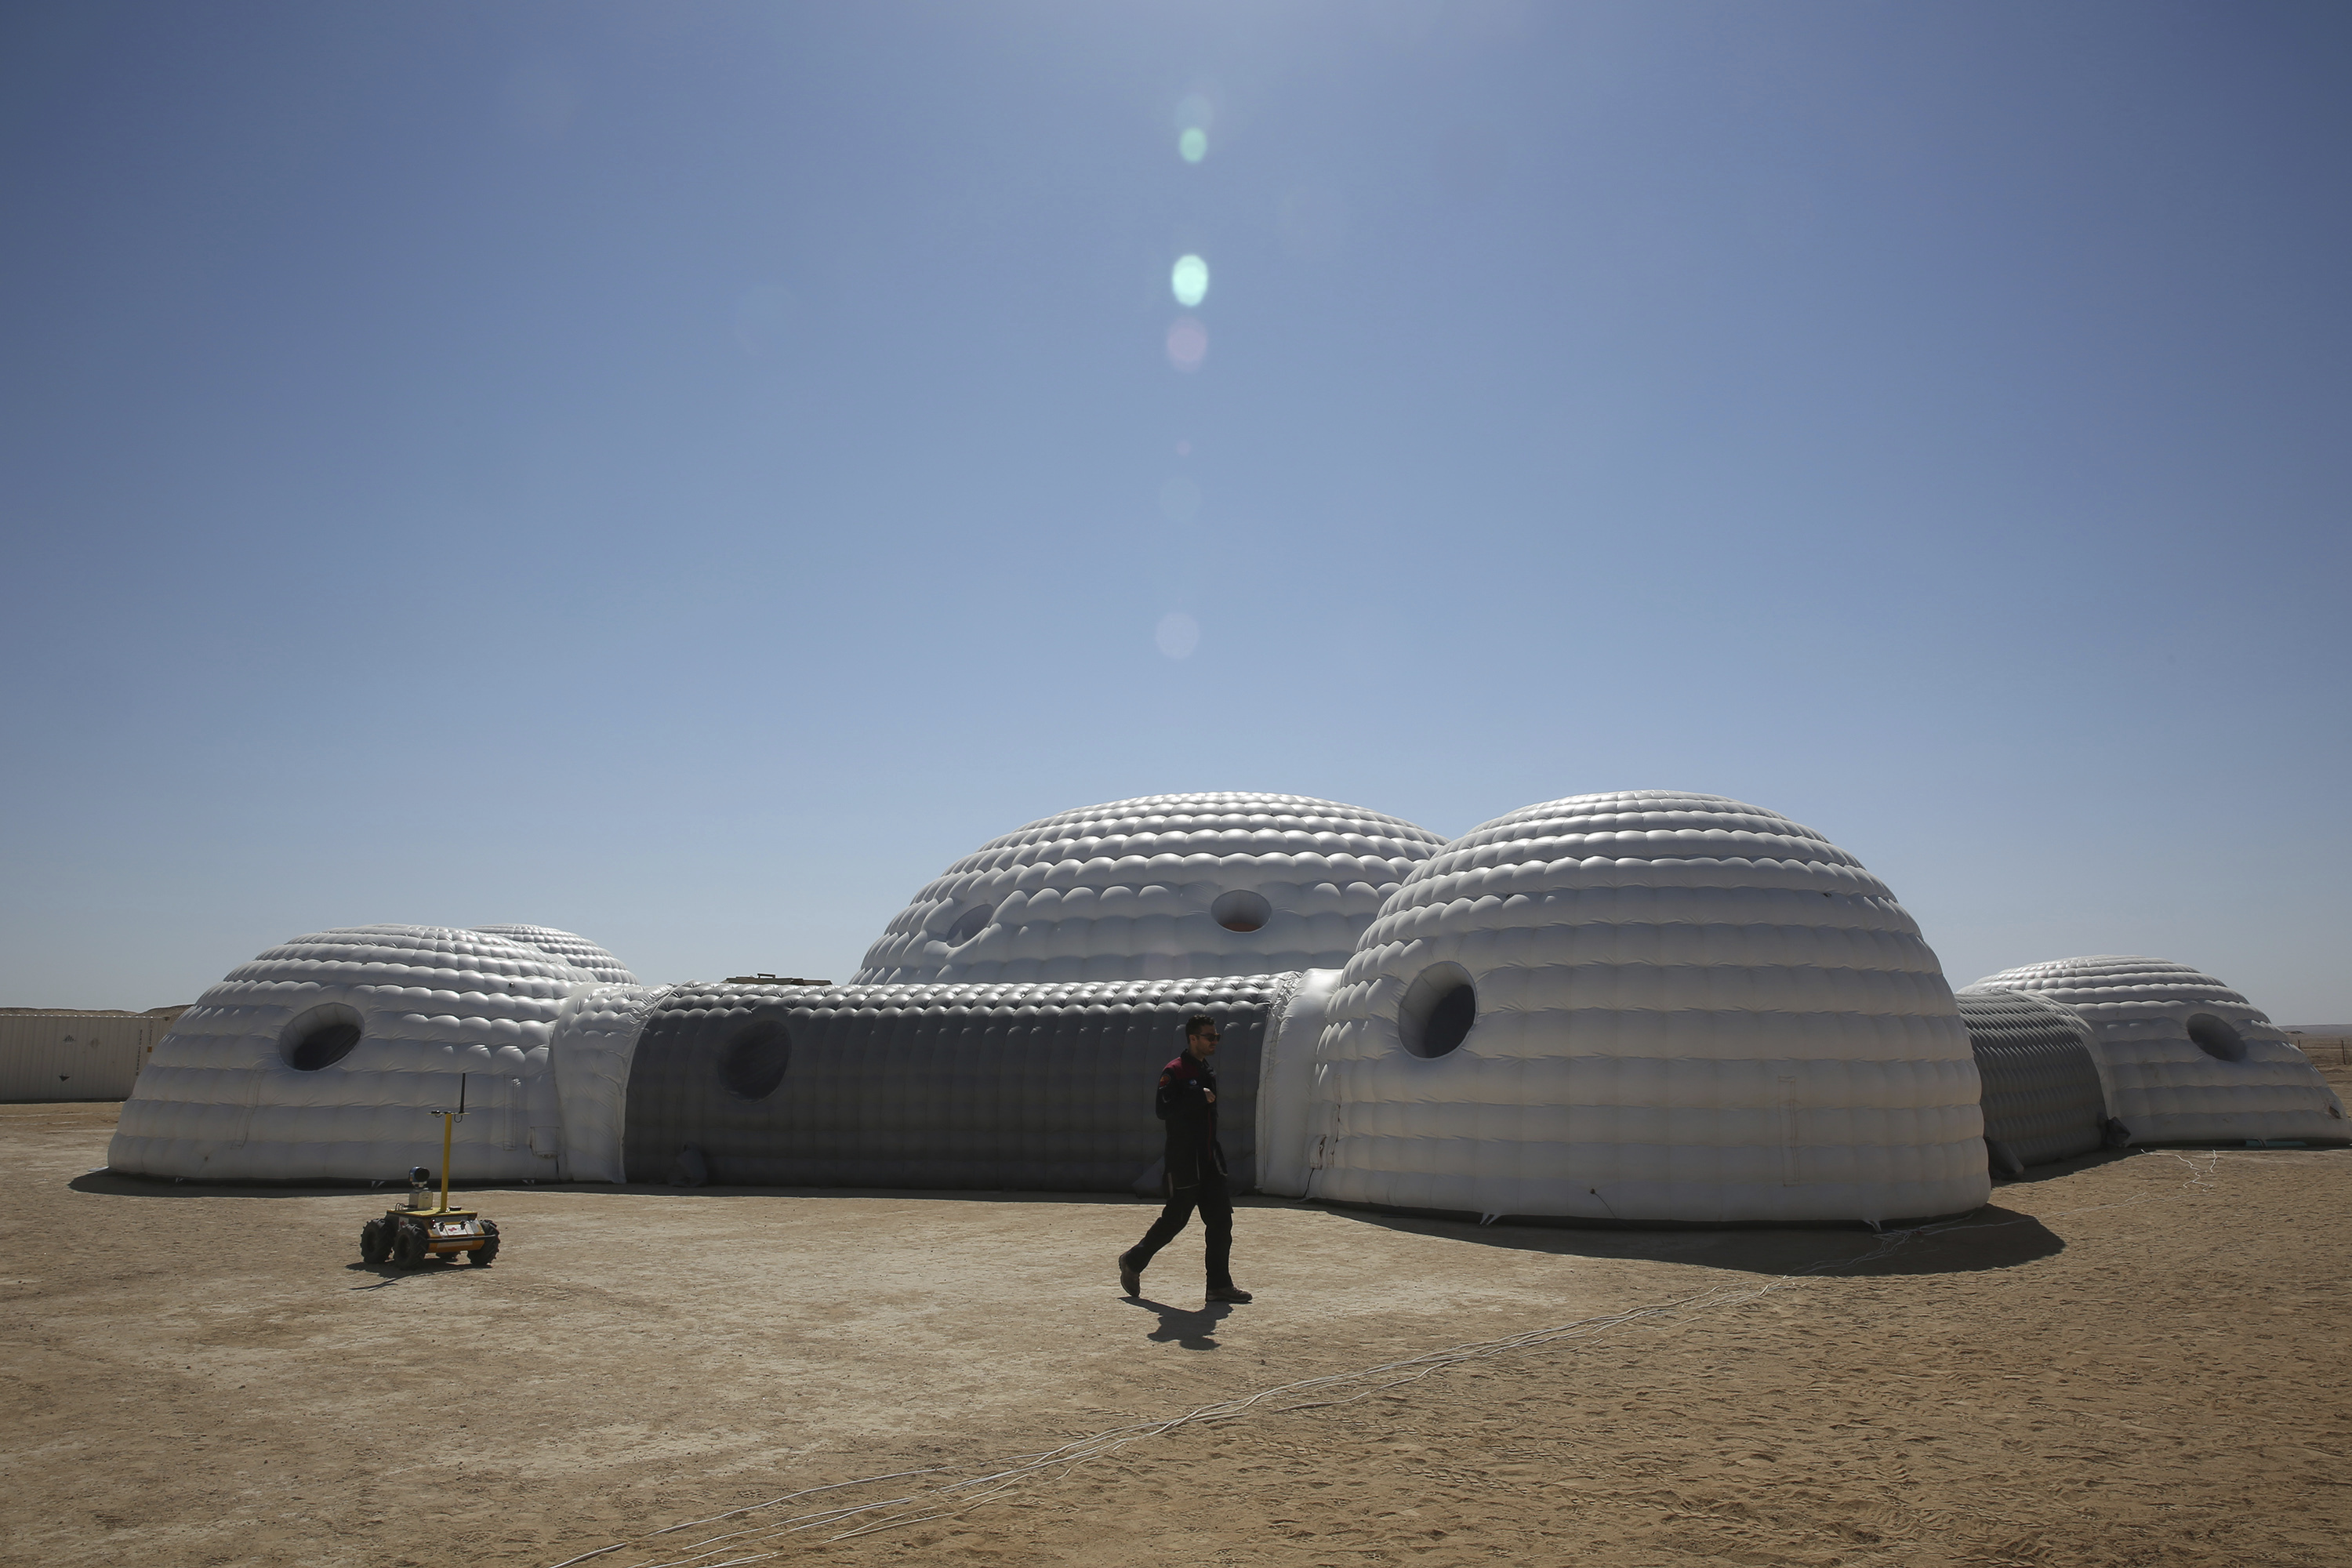 A 2.4-ton inflated habitat used by the AMADEE-18 Mars simulation in the Dhofar desert of southern Oman (Sam McNeil/AP)